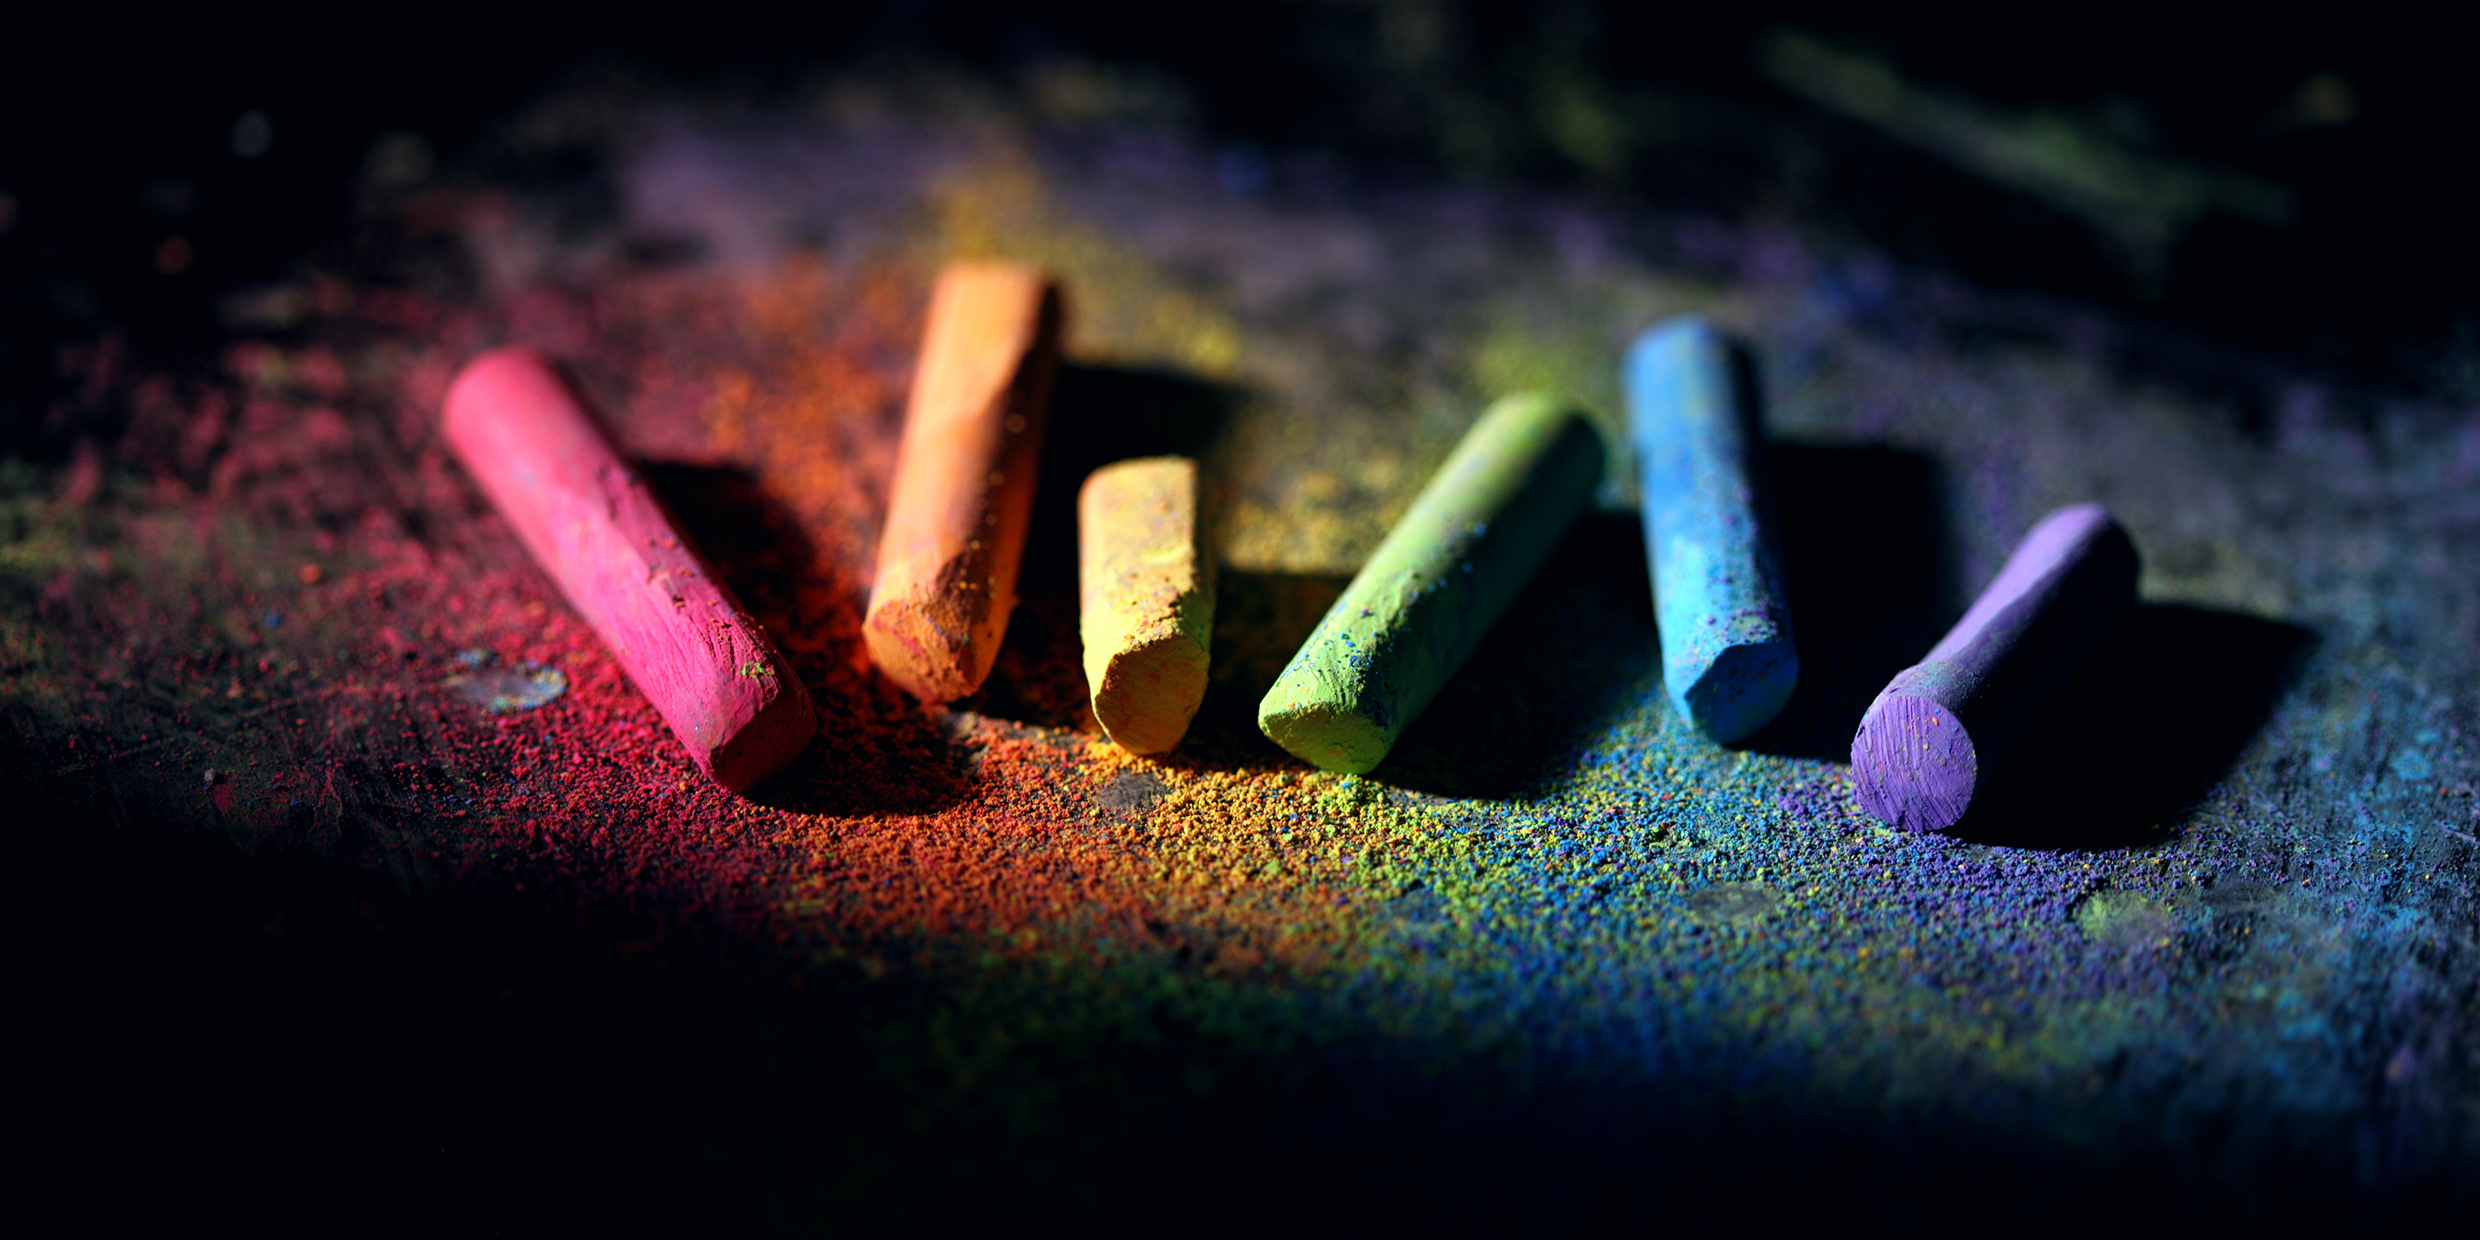 Image of an assortment of colored pieces of chalk against a dark background